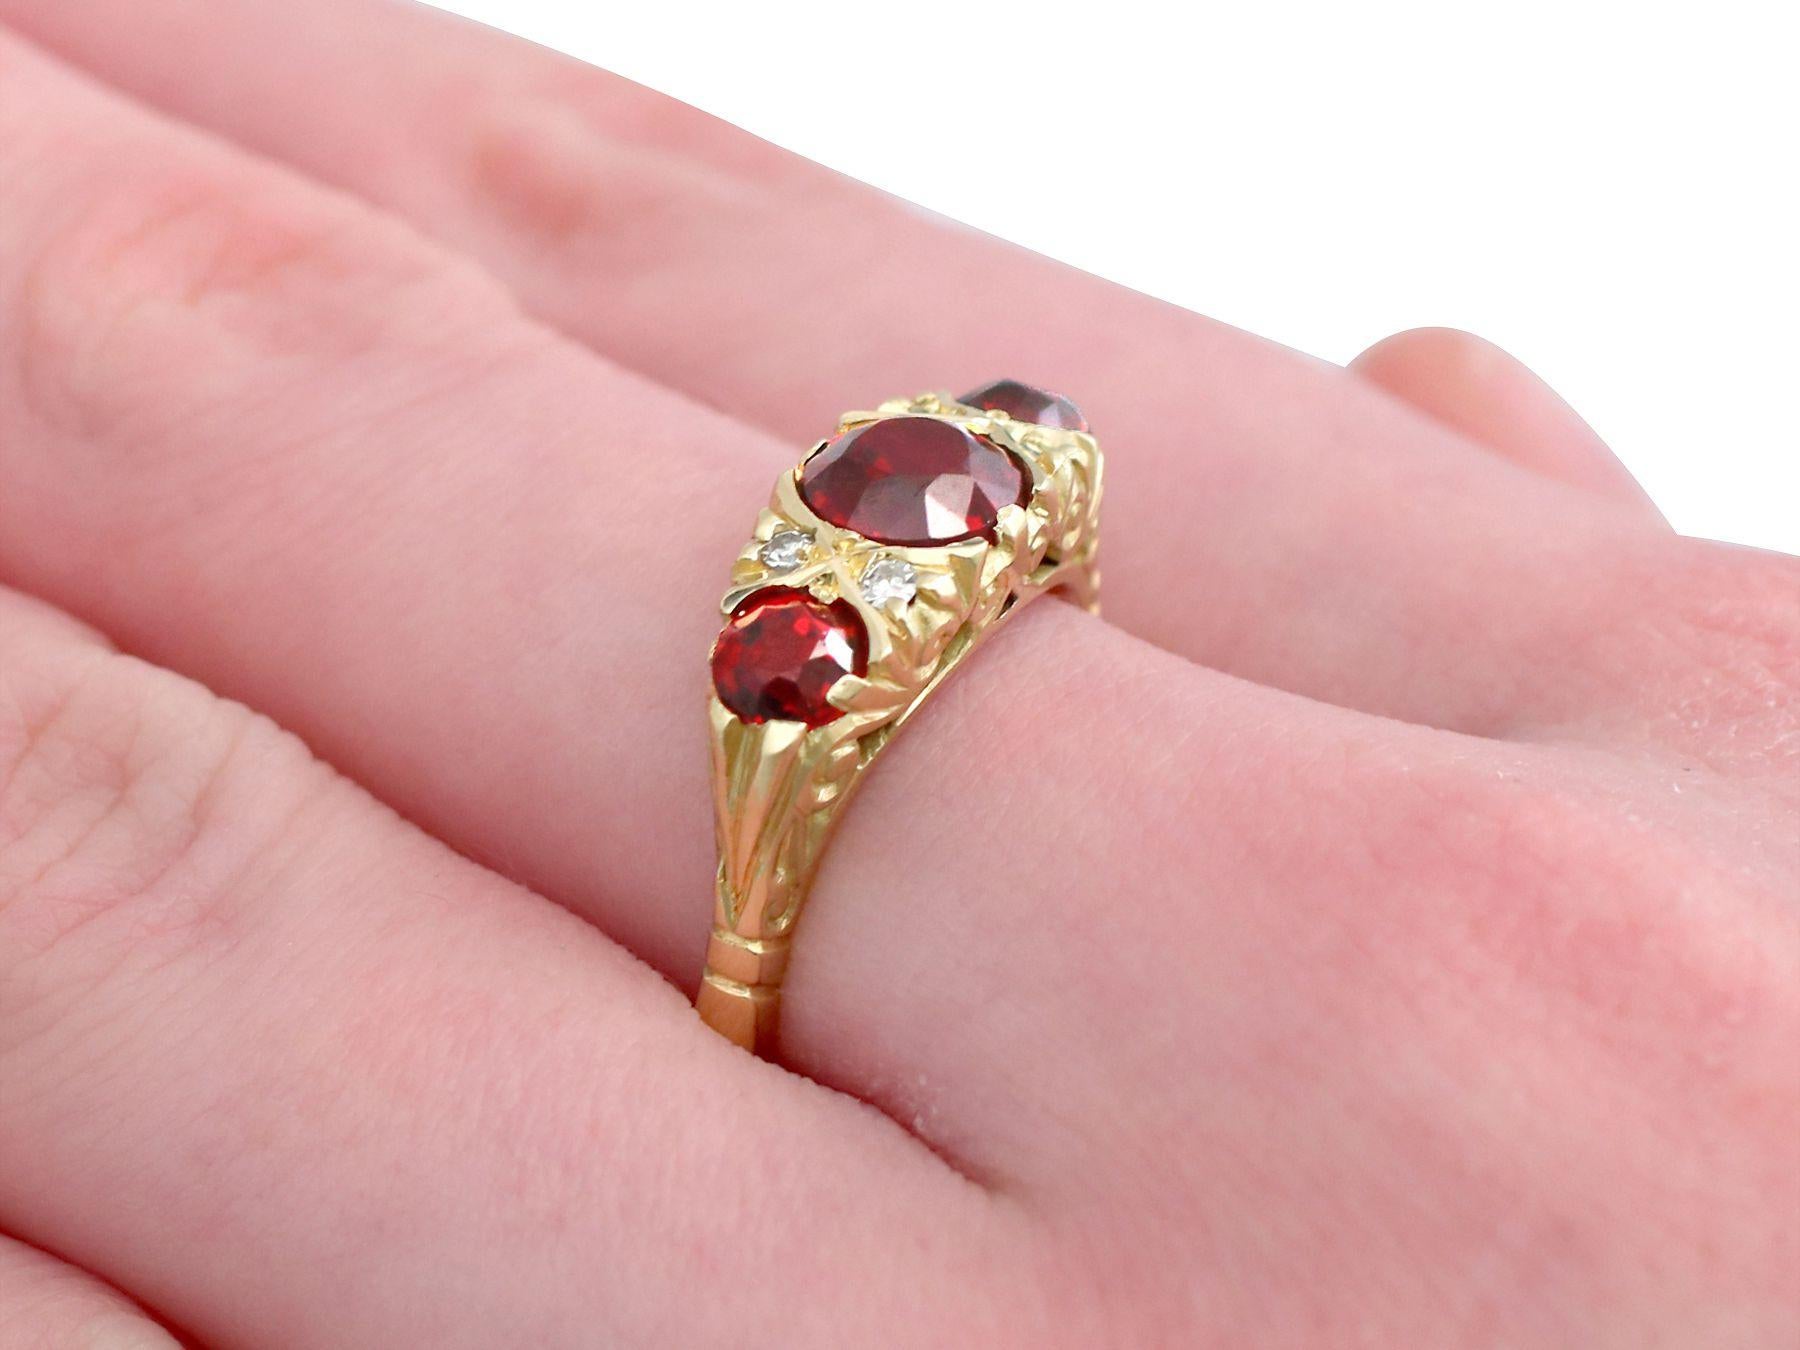 Vintage 1976 2.05 Carat Garnet and Diamond Yellow Gold Cocktail Ring In Excellent Condition For Sale In Jesmond, Newcastle Upon Tyne